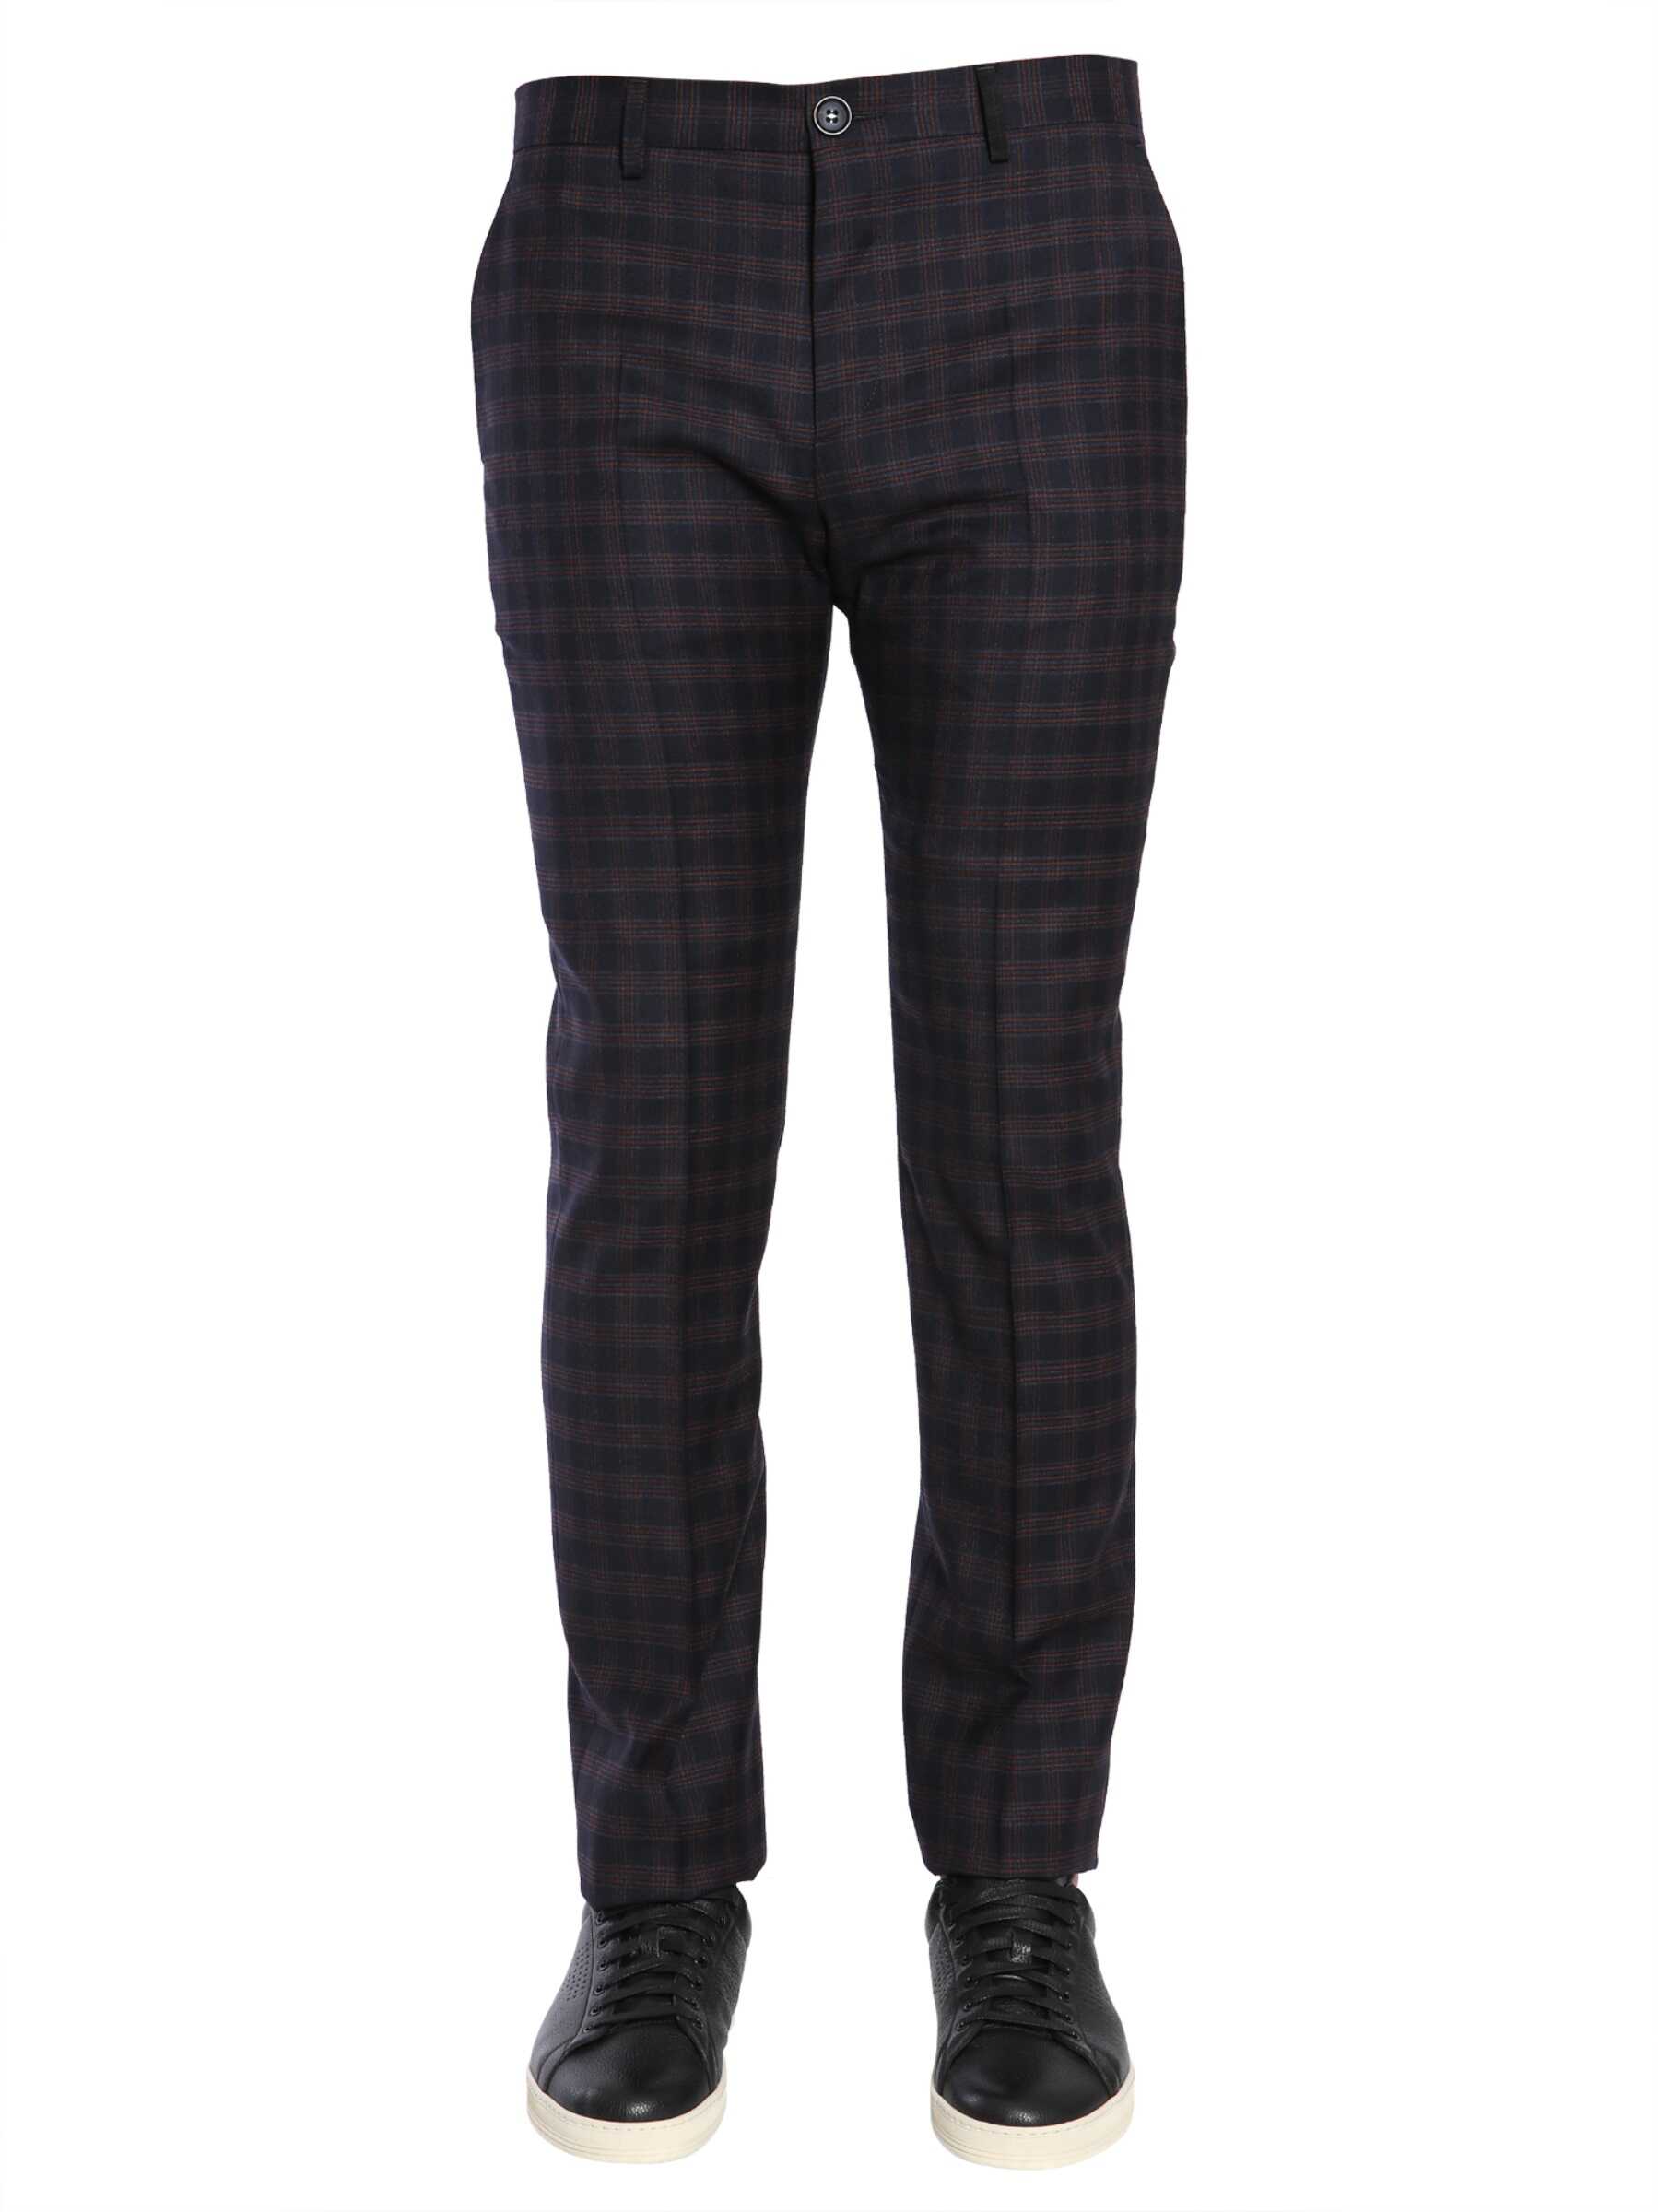 PS by Paul Smith Slim Fit Trousers BLUE image